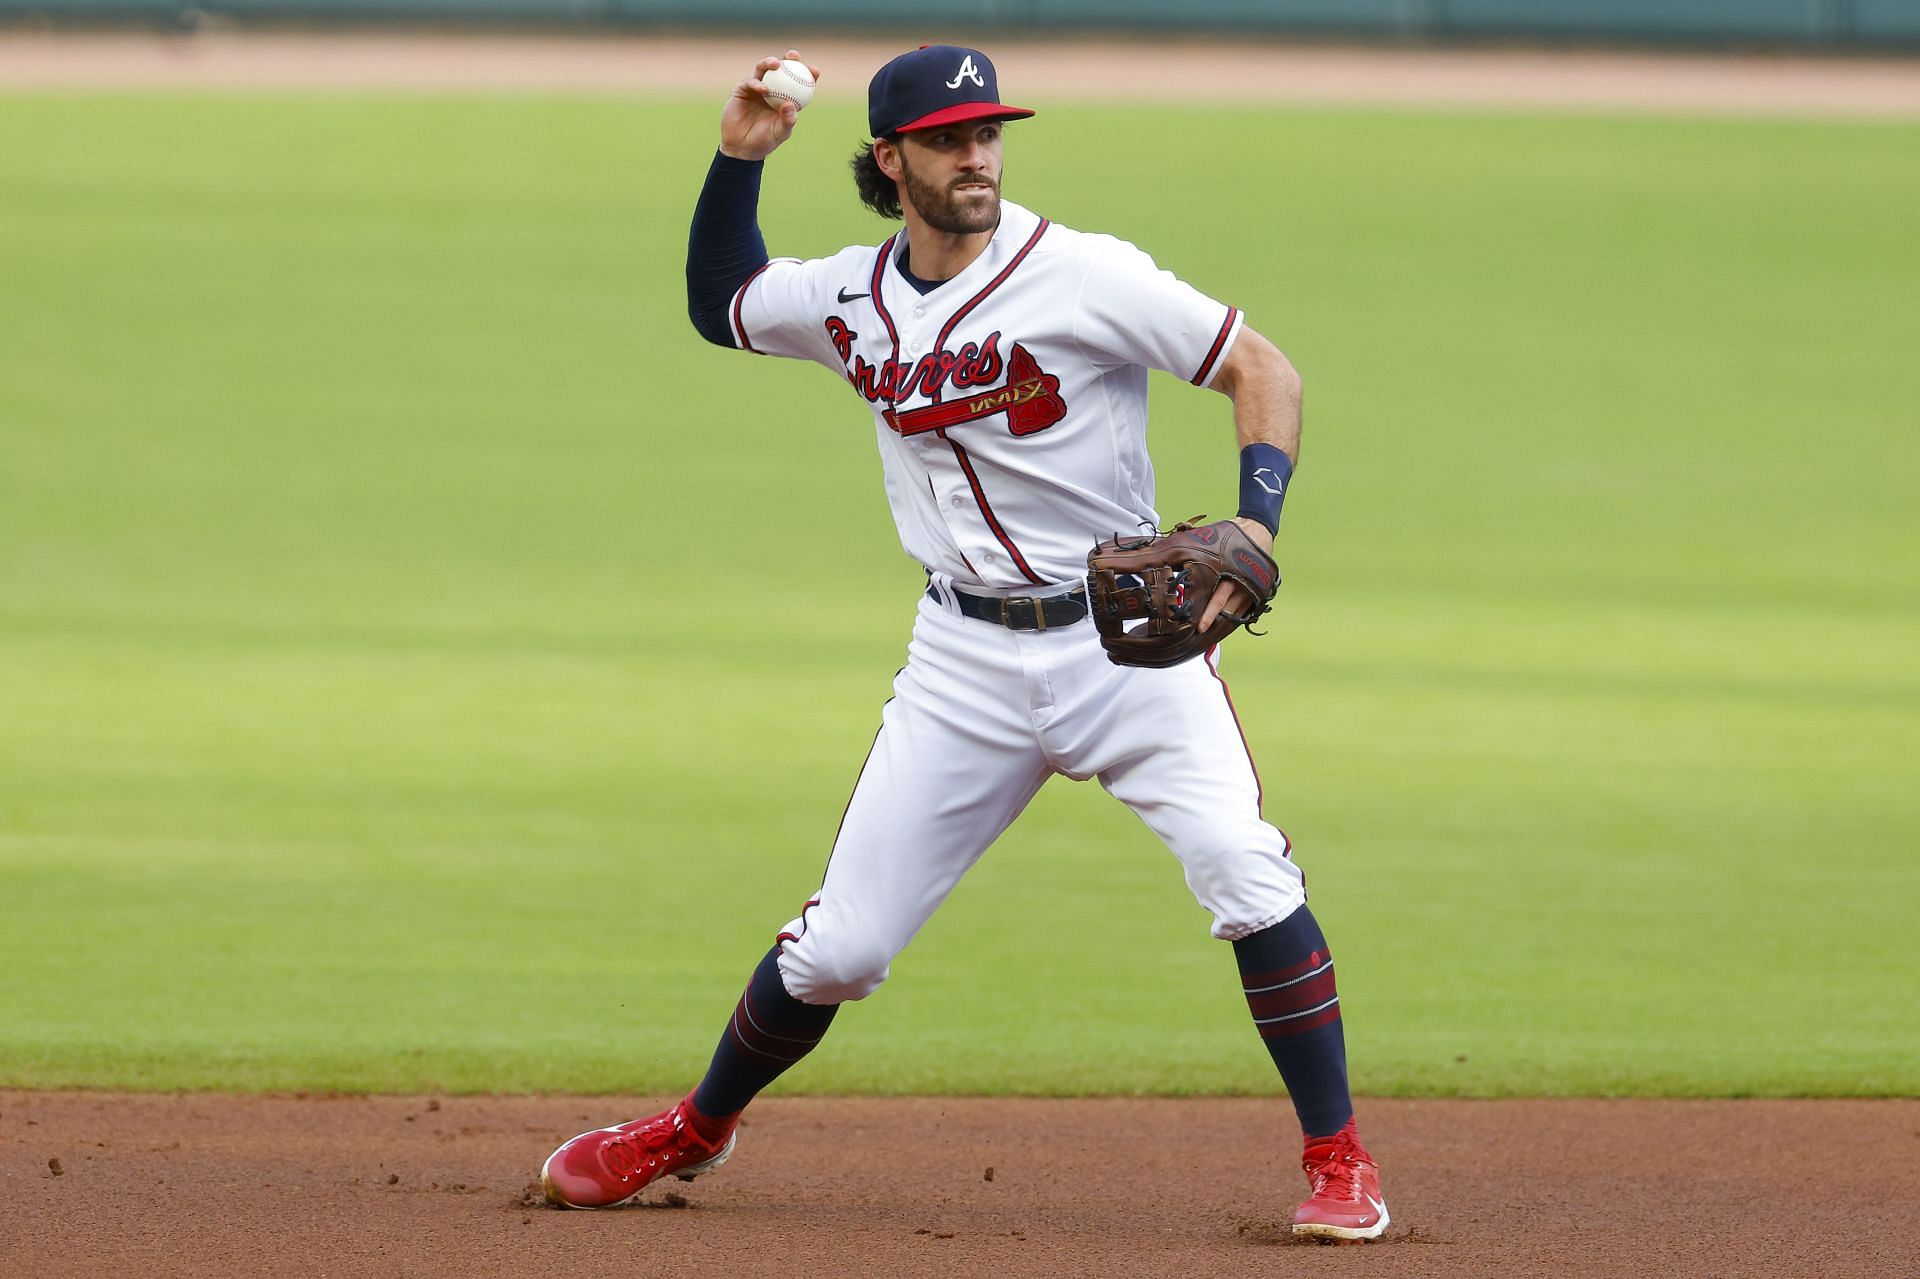 Dansby Swanson is the new shortstop for the Chicago Cubs. : r/mlb